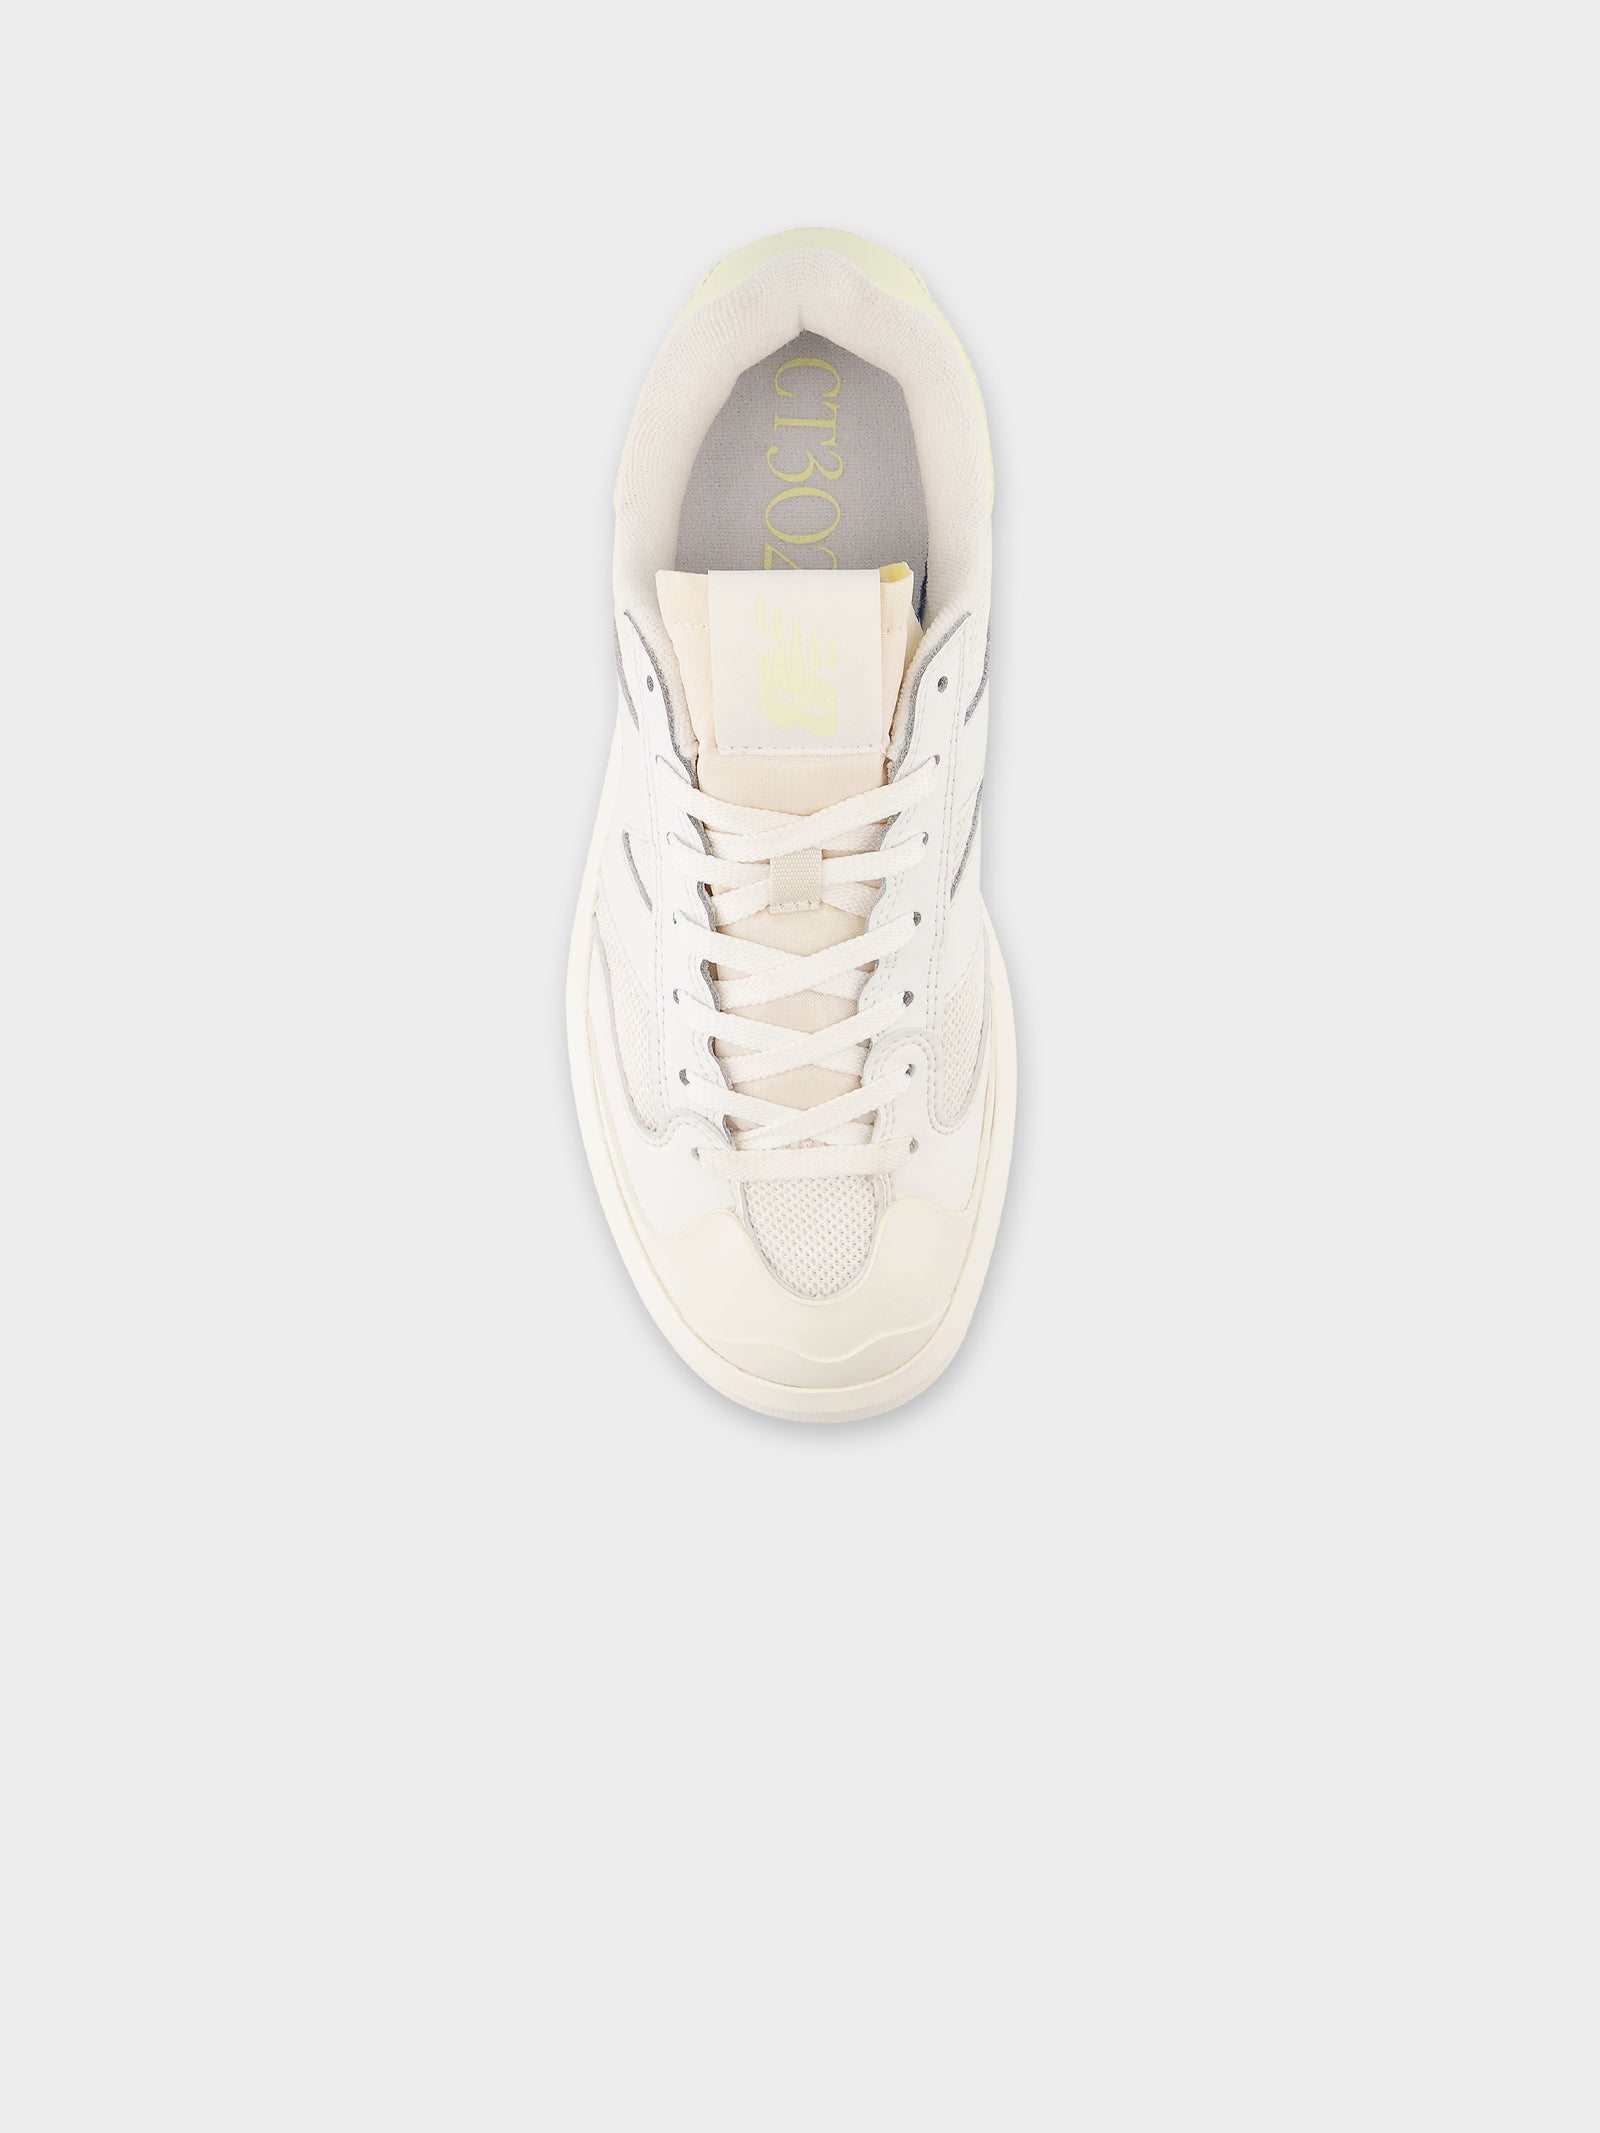 Unisex CT302 Sneakers in Off White